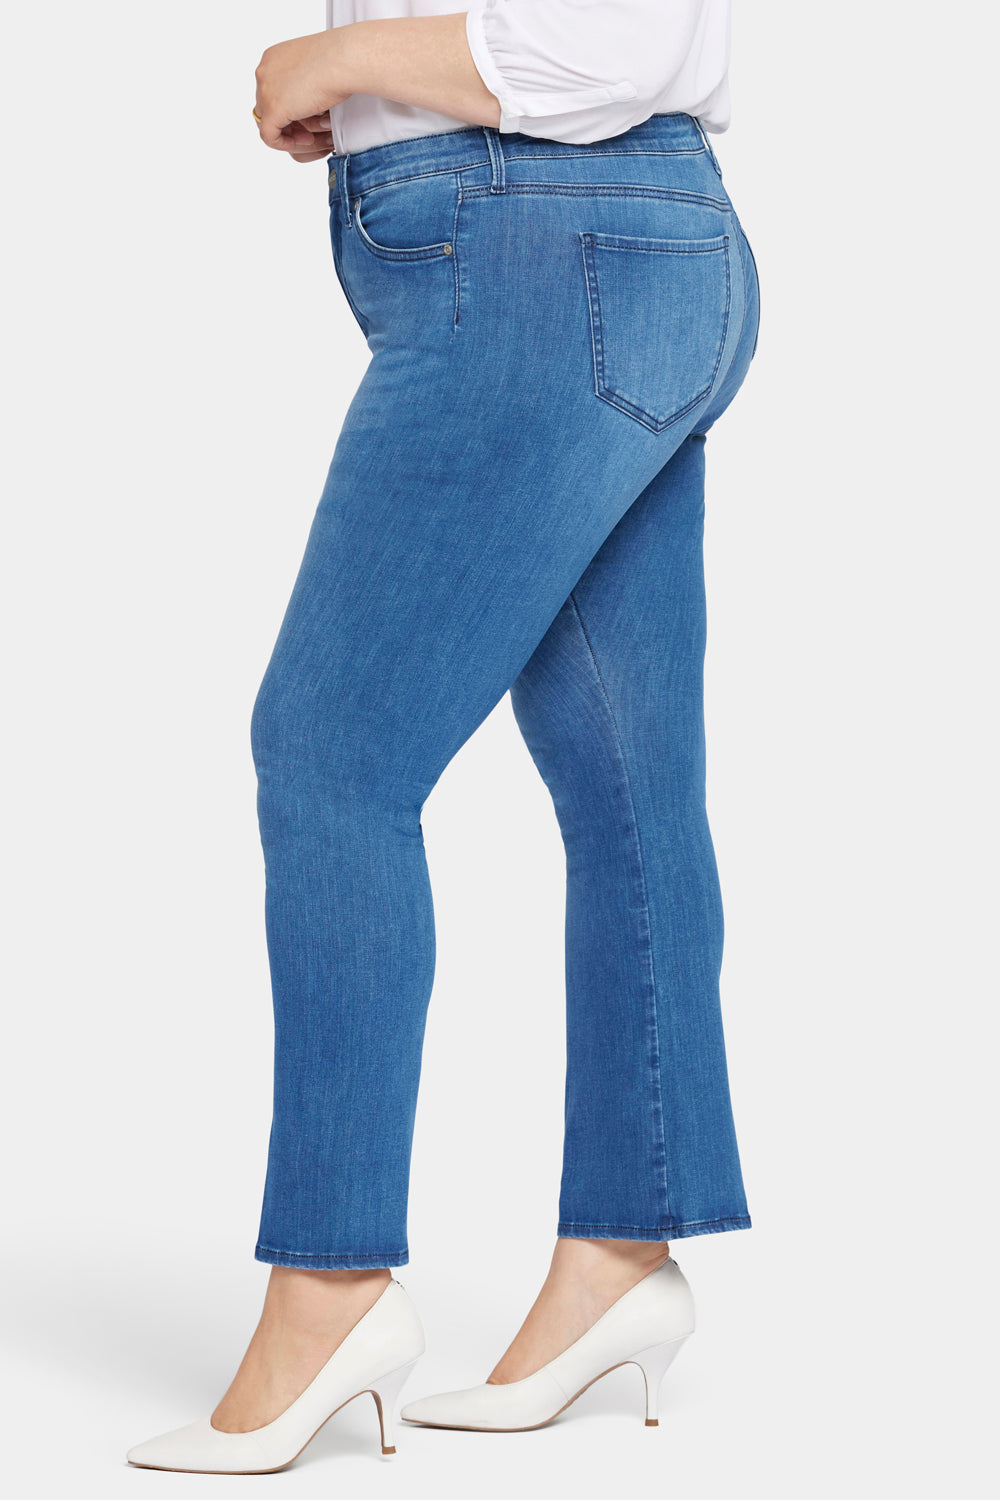 Le Silhouette Slim Bootcut Jeans In Long Inseam Plus Size With High Rise -  Amour Blue | NYDJ